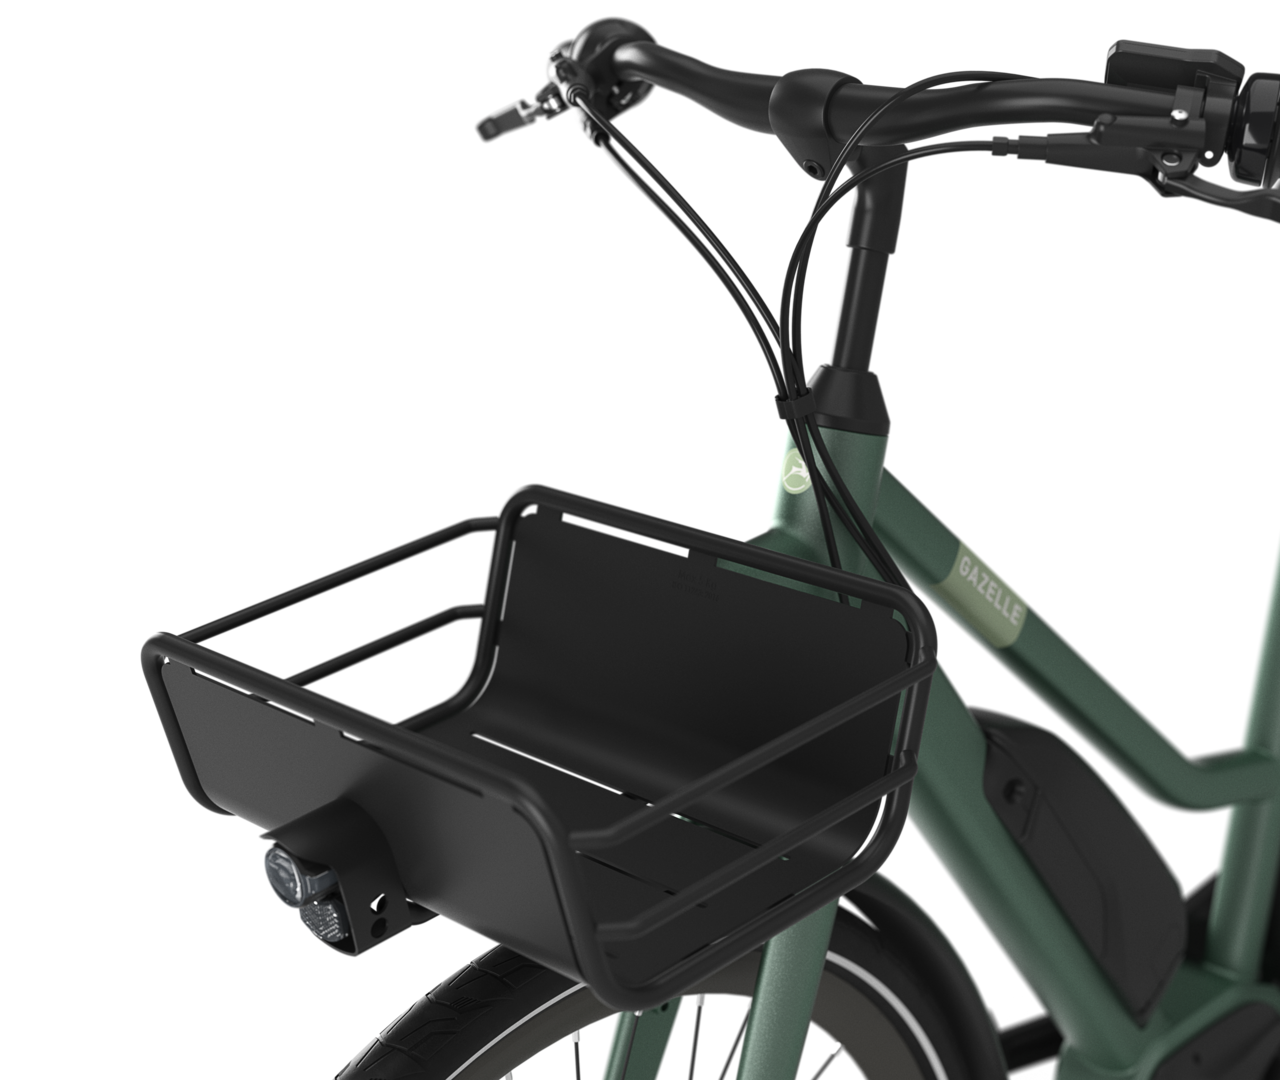 Additional loading capacity at the front Gazelle Esprit C7 HMS E-bike low-step moss green